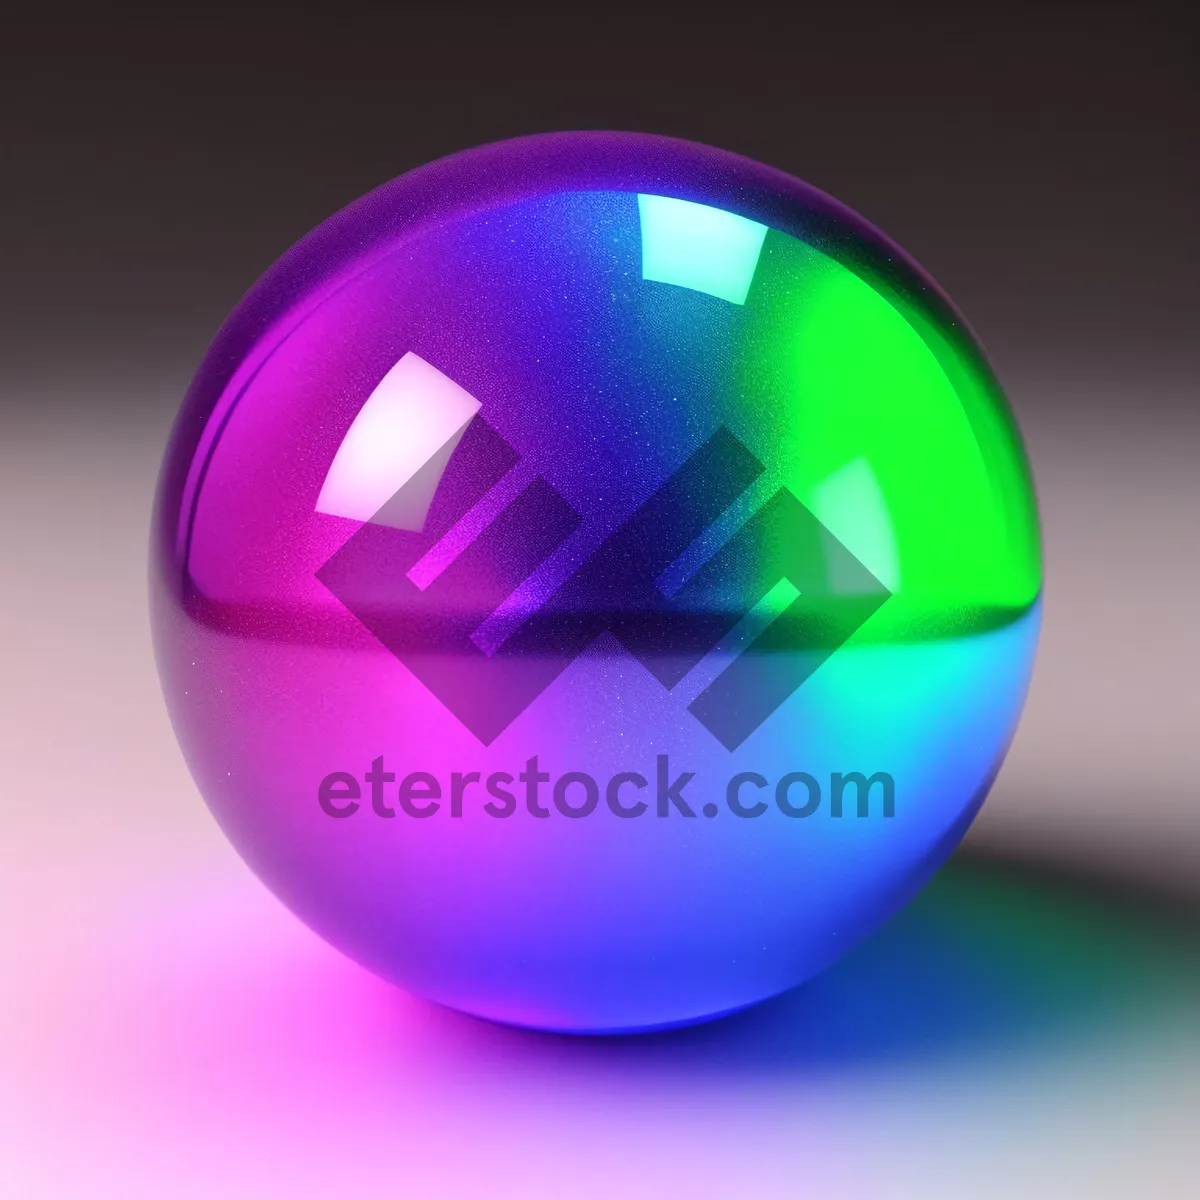 Picture of Shiny Glass Sphere Web Button Icon